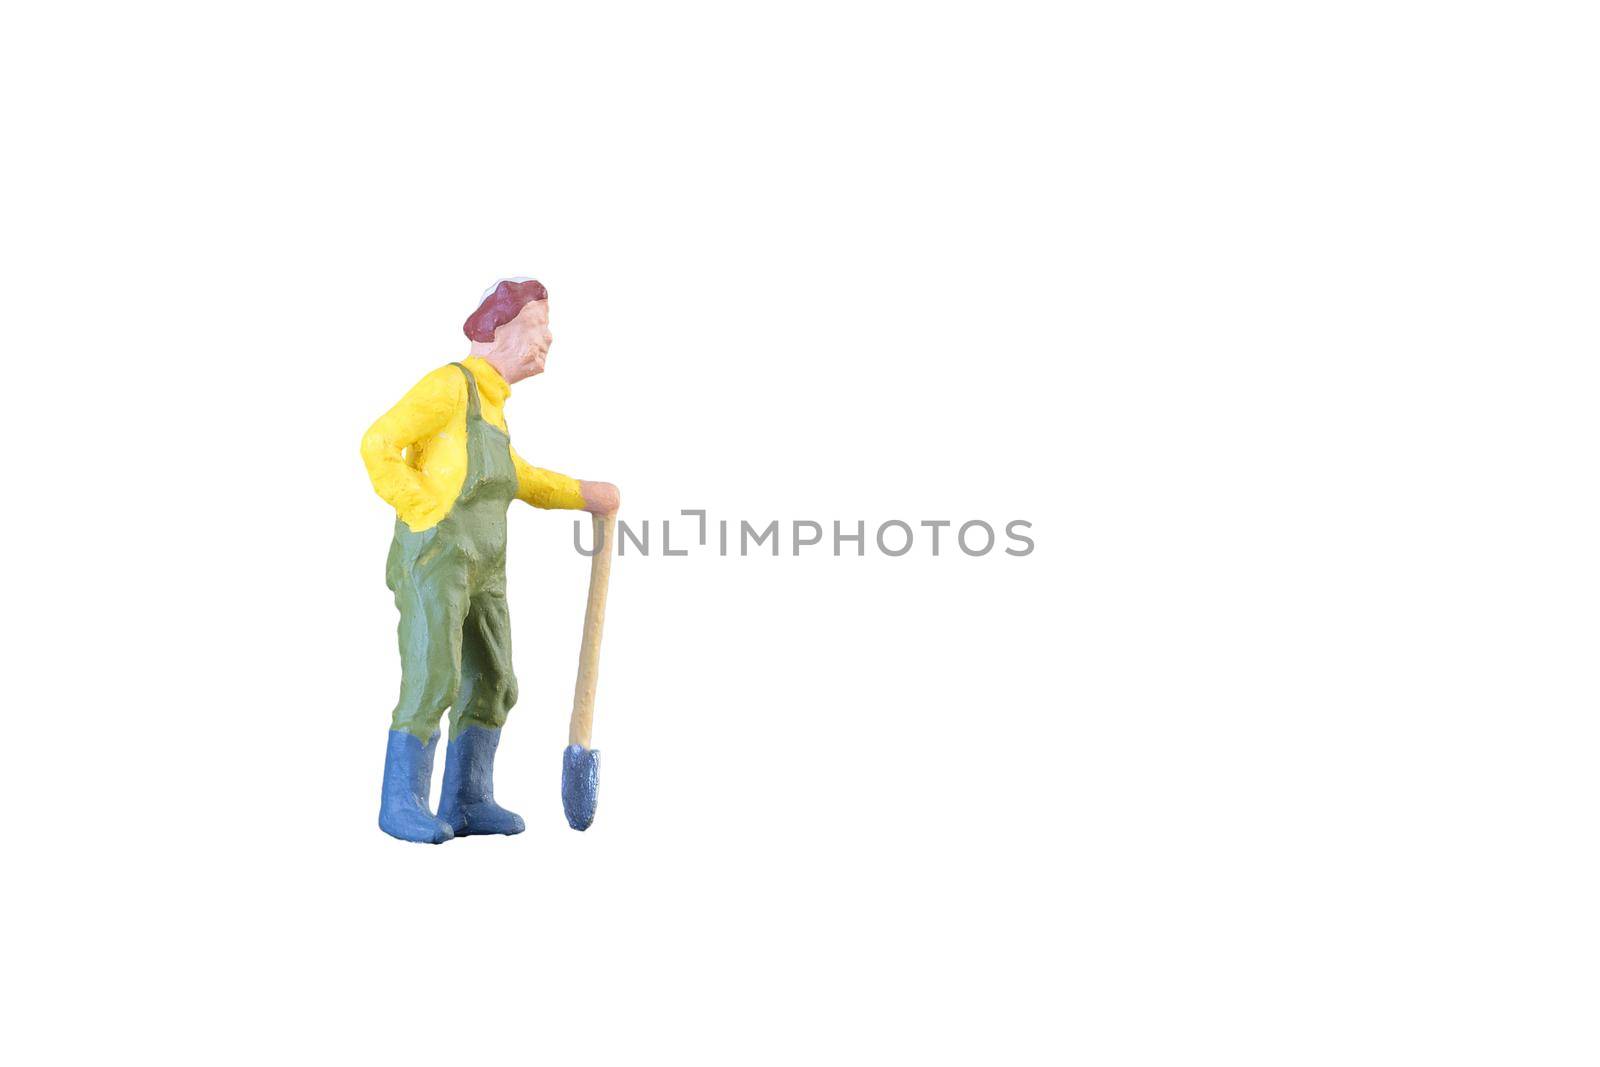 Close up of Miniature farmer people isolated with clipping path on white background . Elegant Design with copy space for placement your text, mock up for farmer and gradening concept.